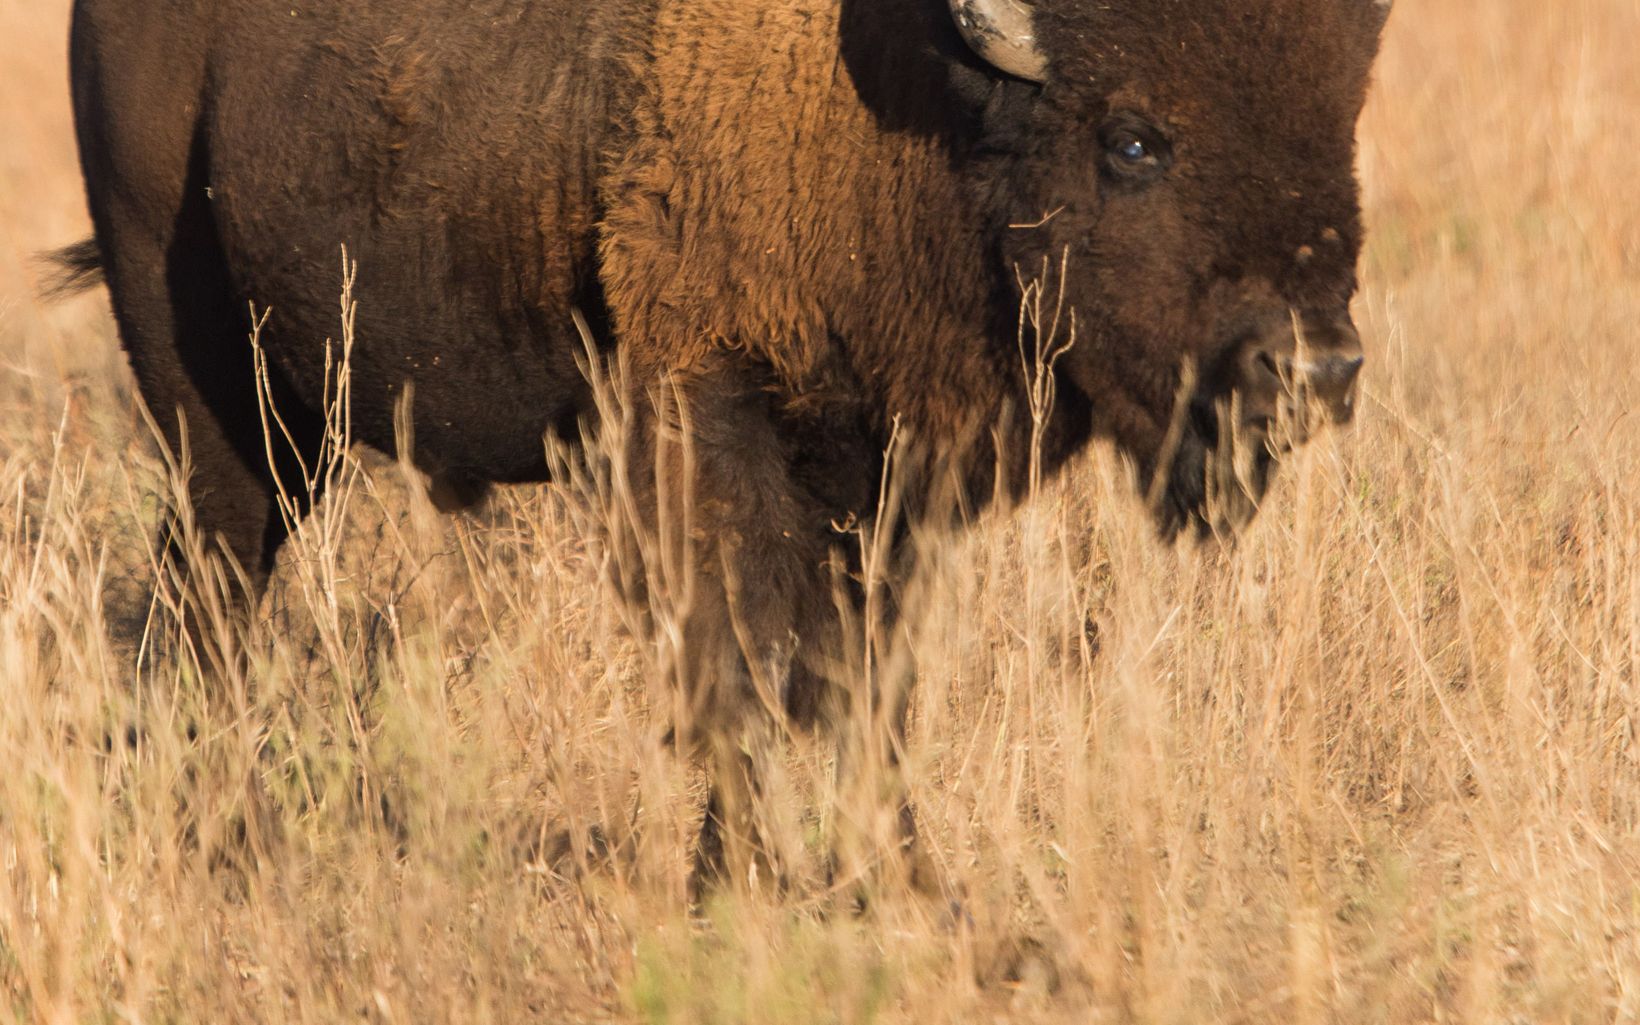 Bison Their grazing patterns play a key role in growing plant diversity, spreading seeds and maintaining healthy grass height, all of which have cascading effects that support other wildlife. © Morgan Heim